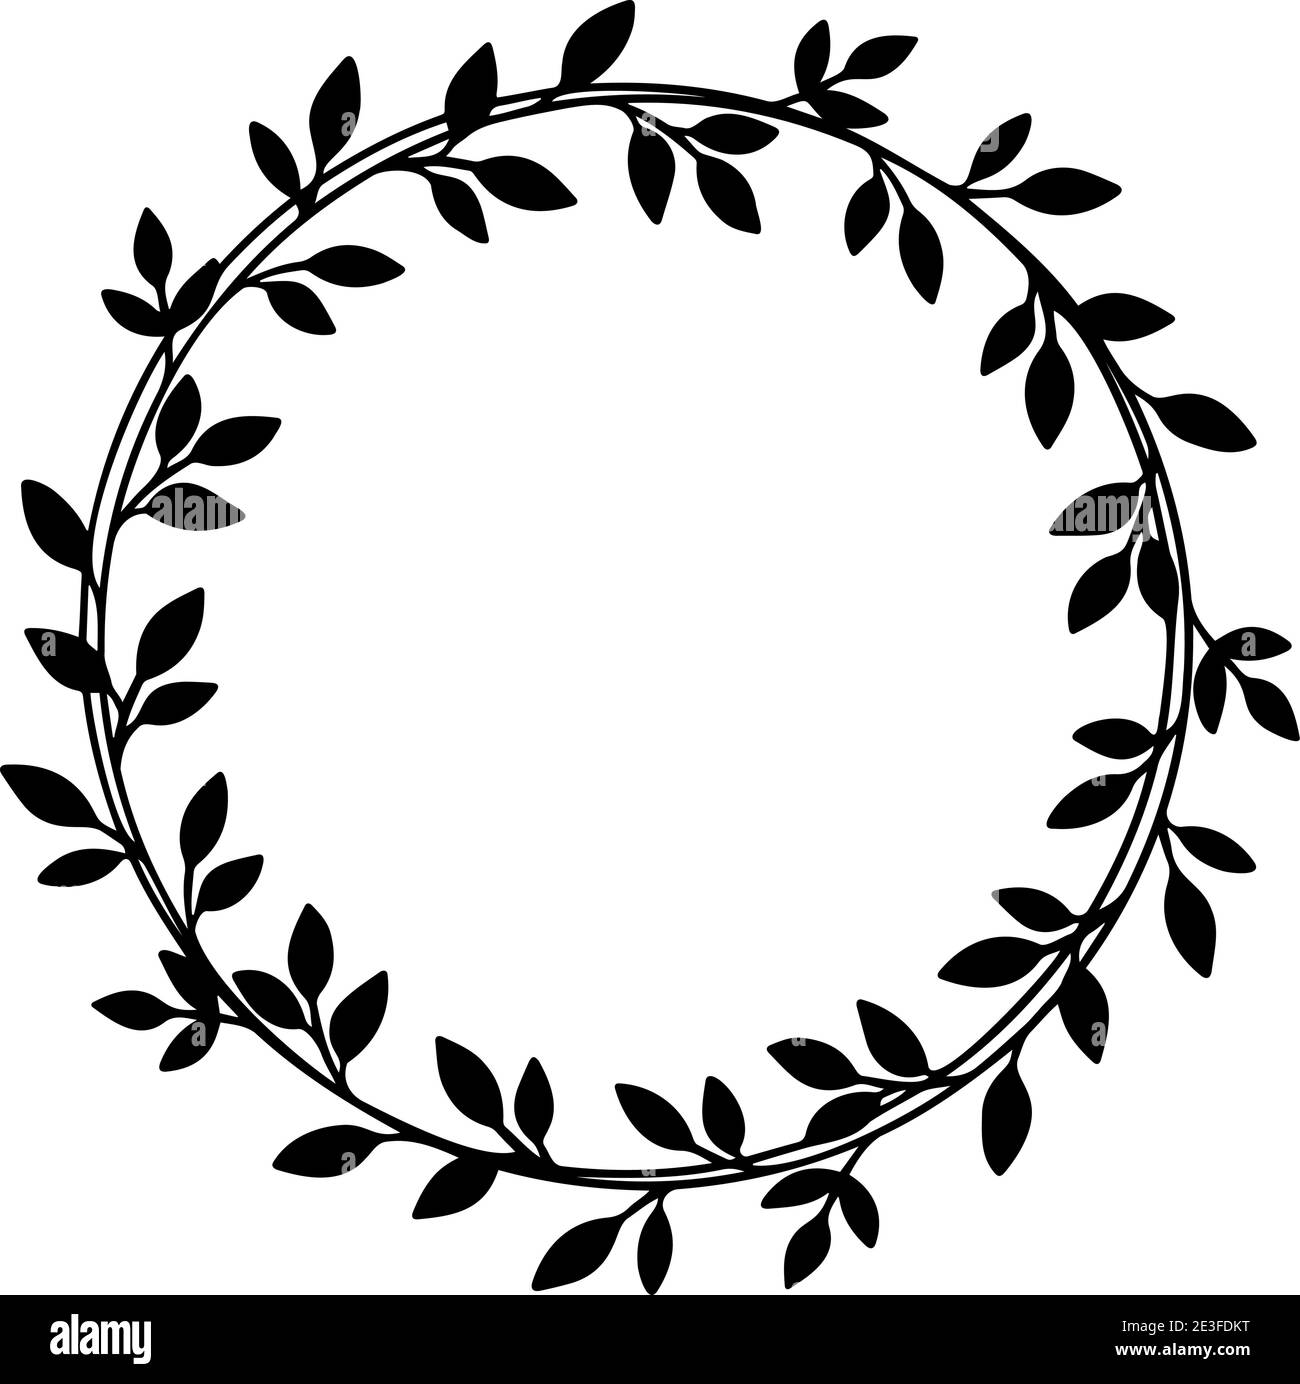 Leaves Round Frame With Leaves For Wedding And Holiday Hand Drawn Vector Wreath Black Floral 3462